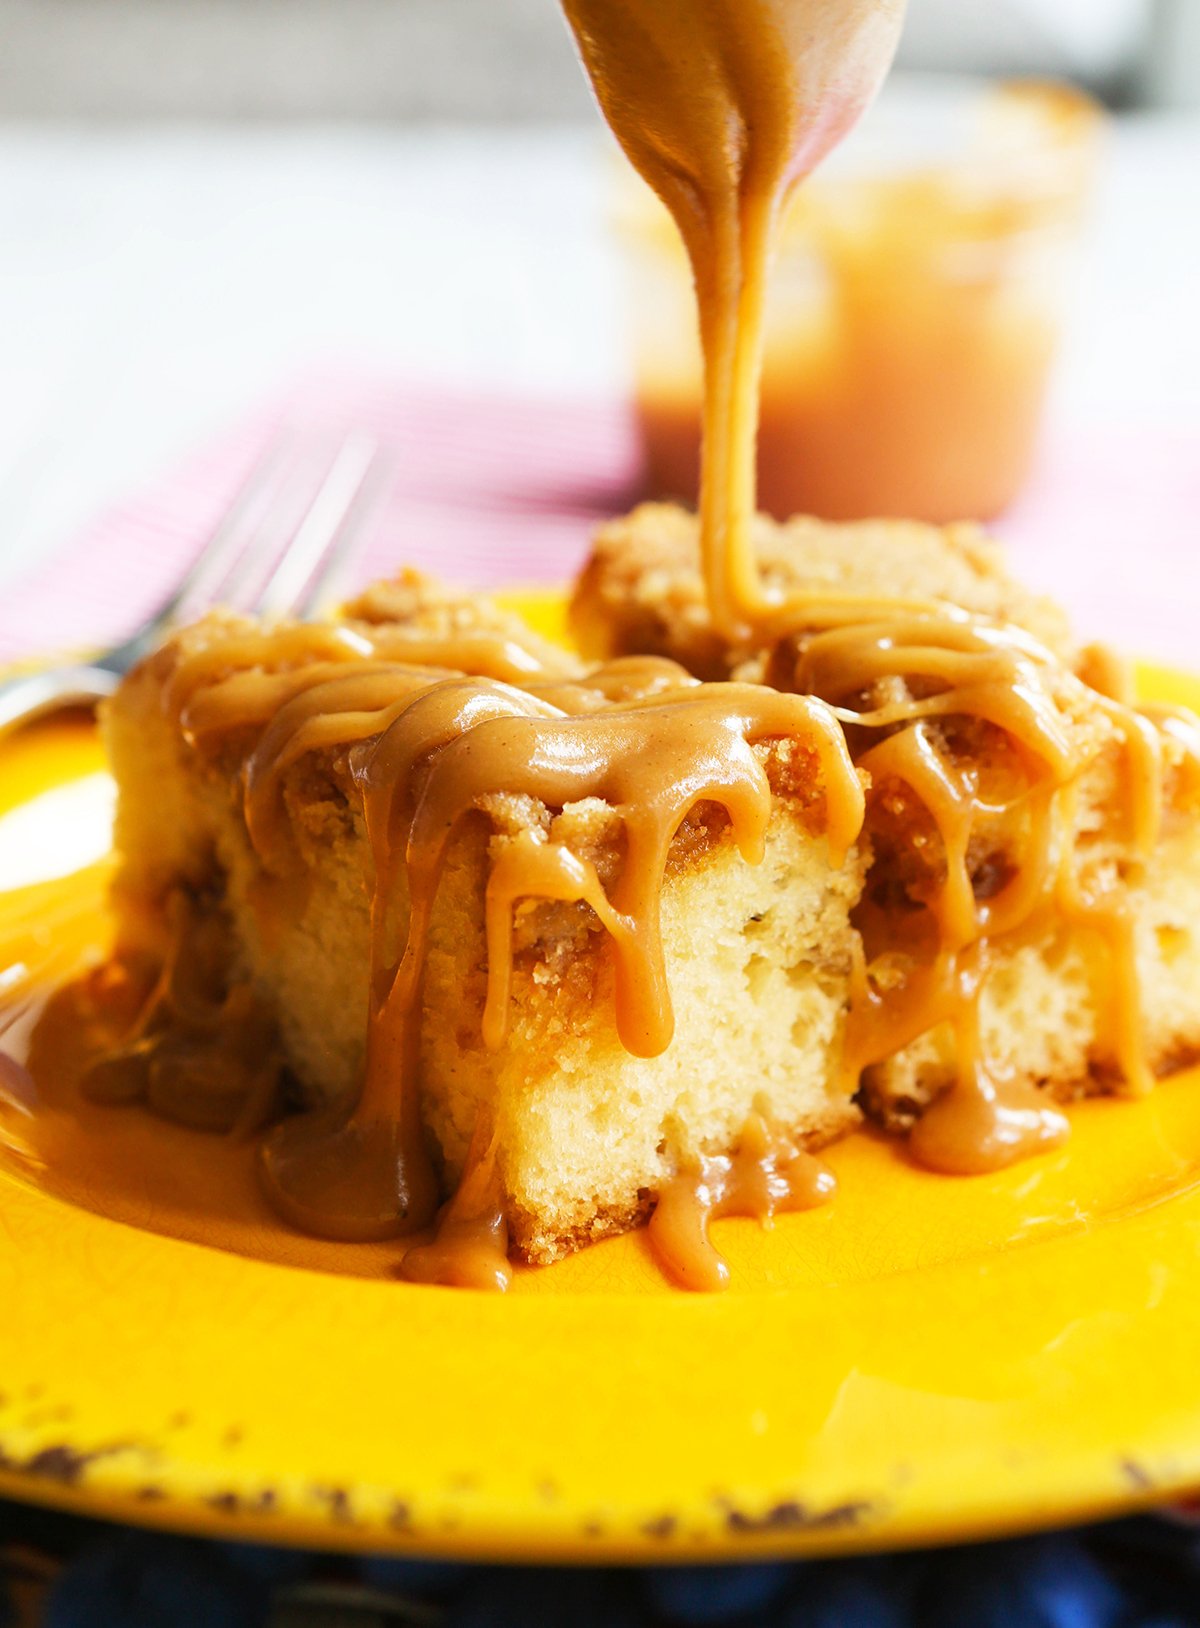 A spoon drizzling caramel sauce over a piece of coffee cake.